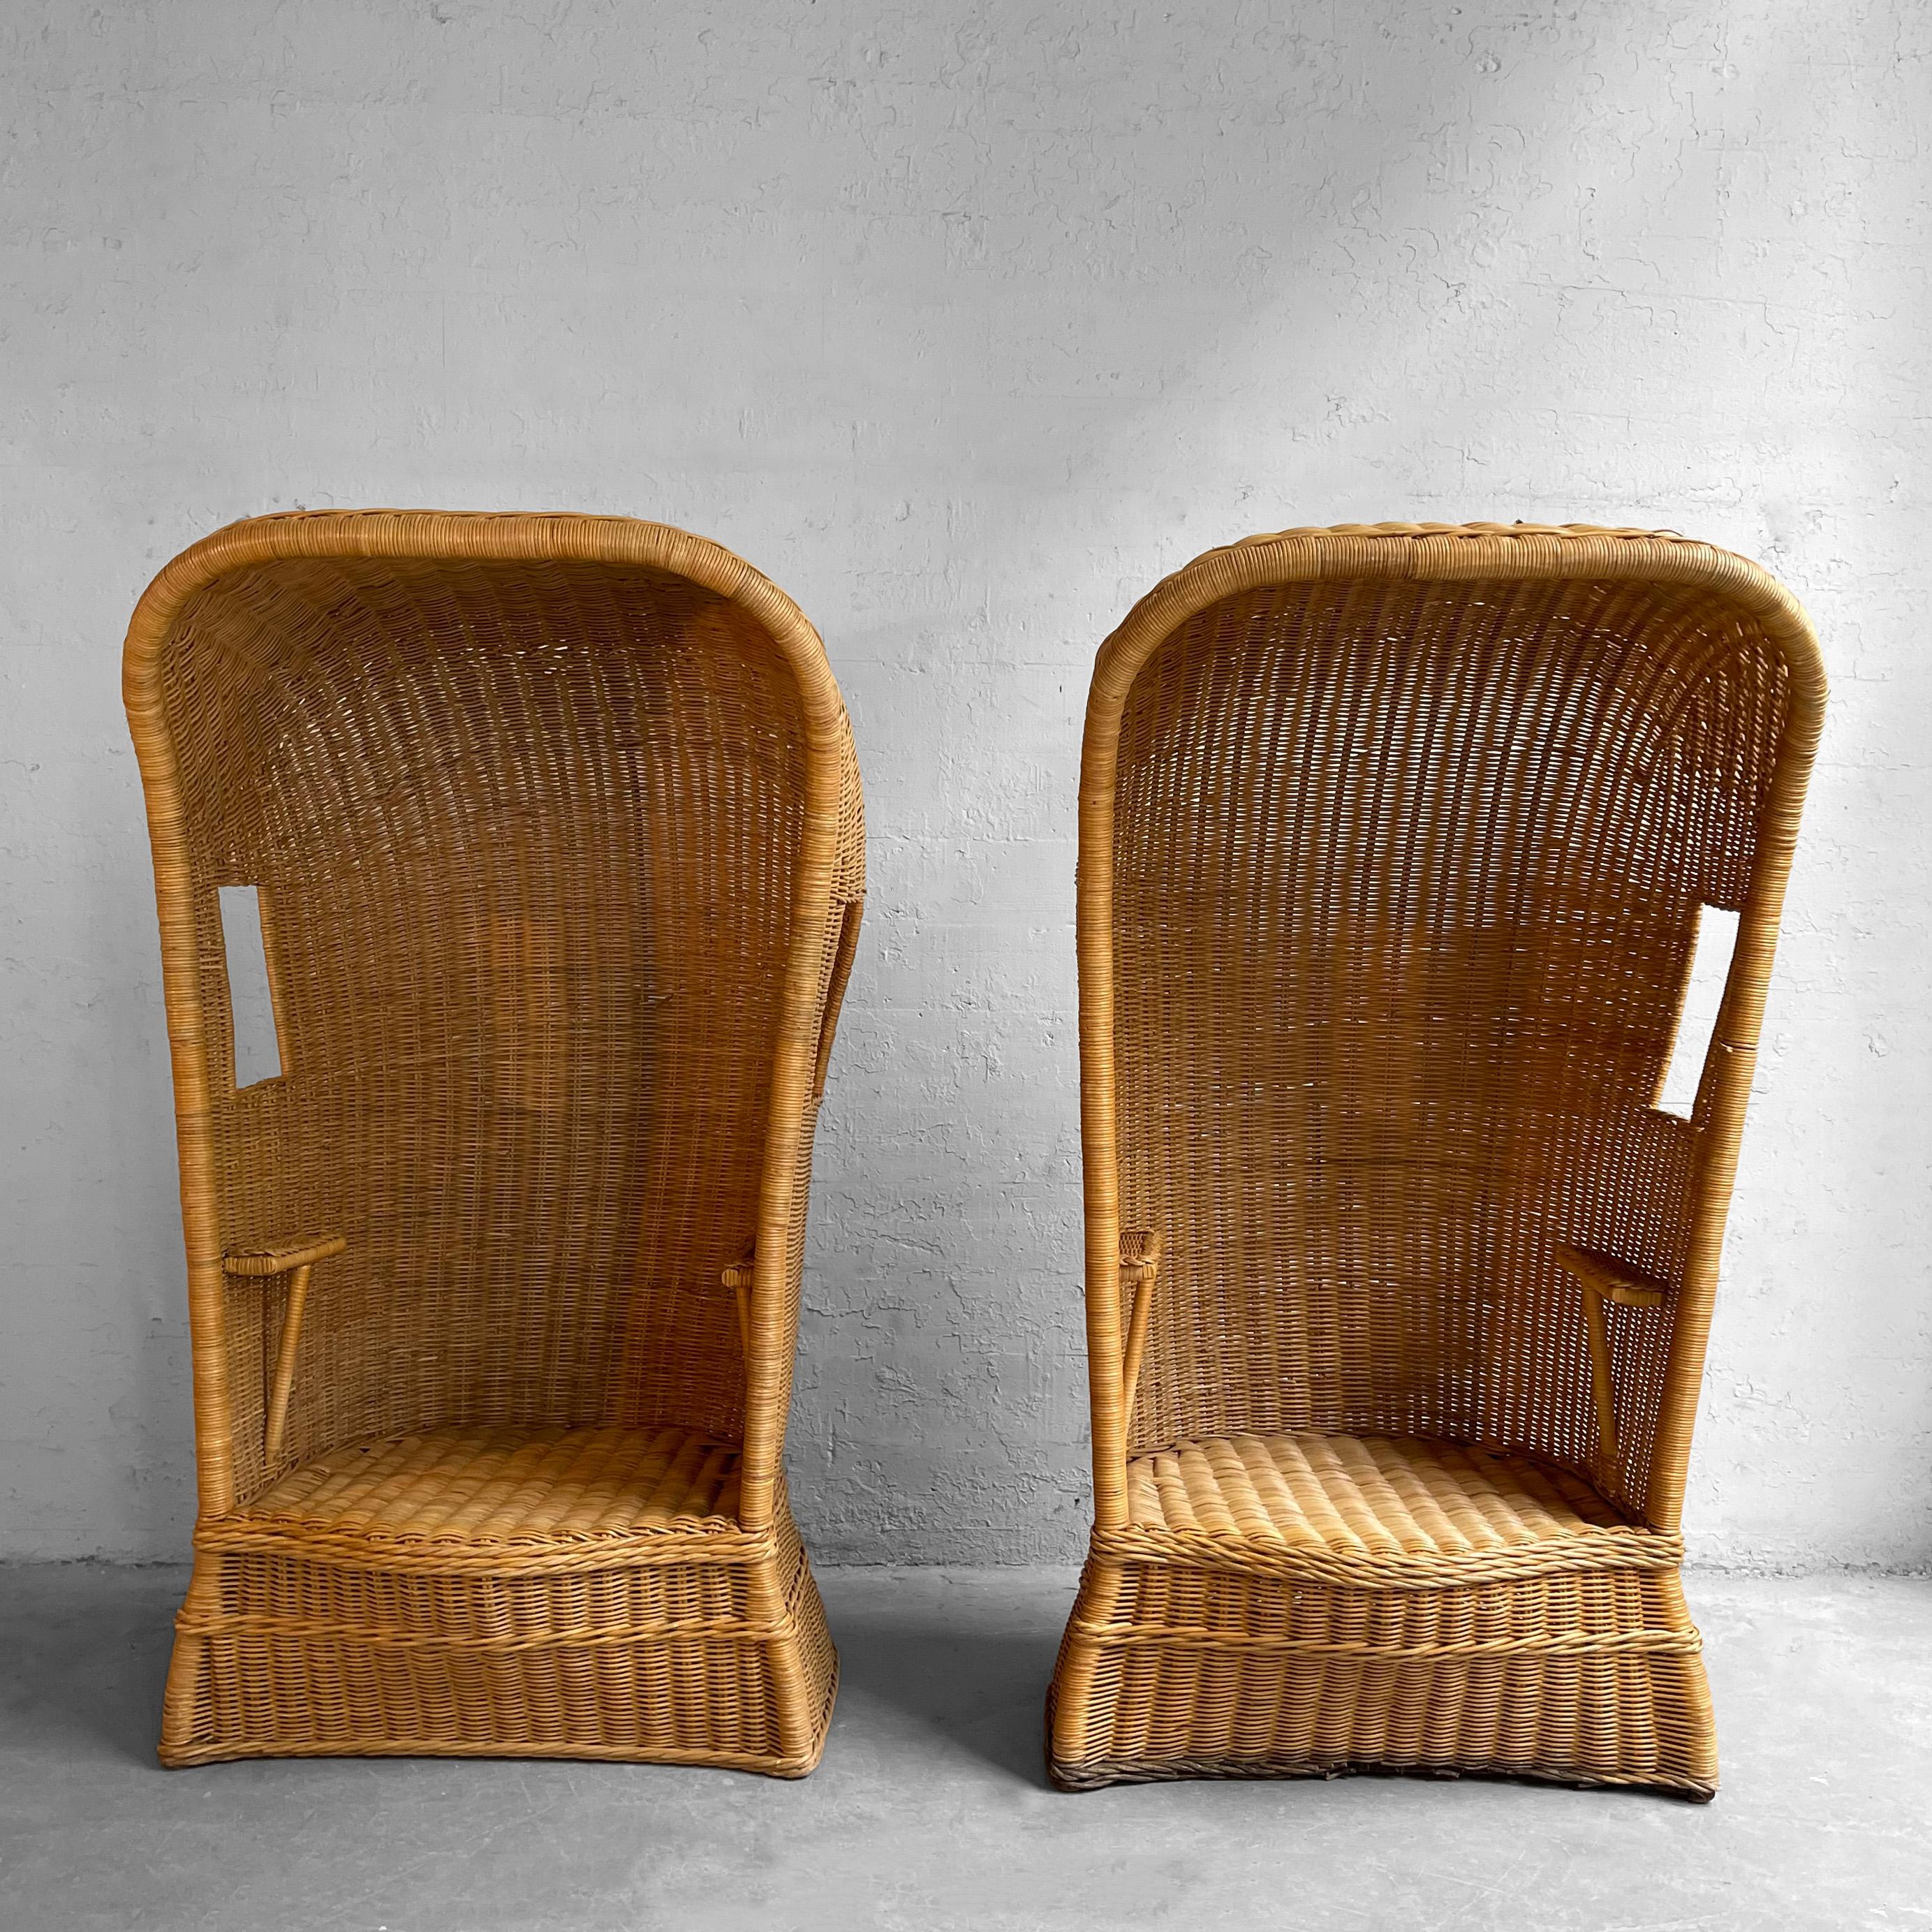 Late Victorian Pair Of Woven Wicker Porter's Chairs